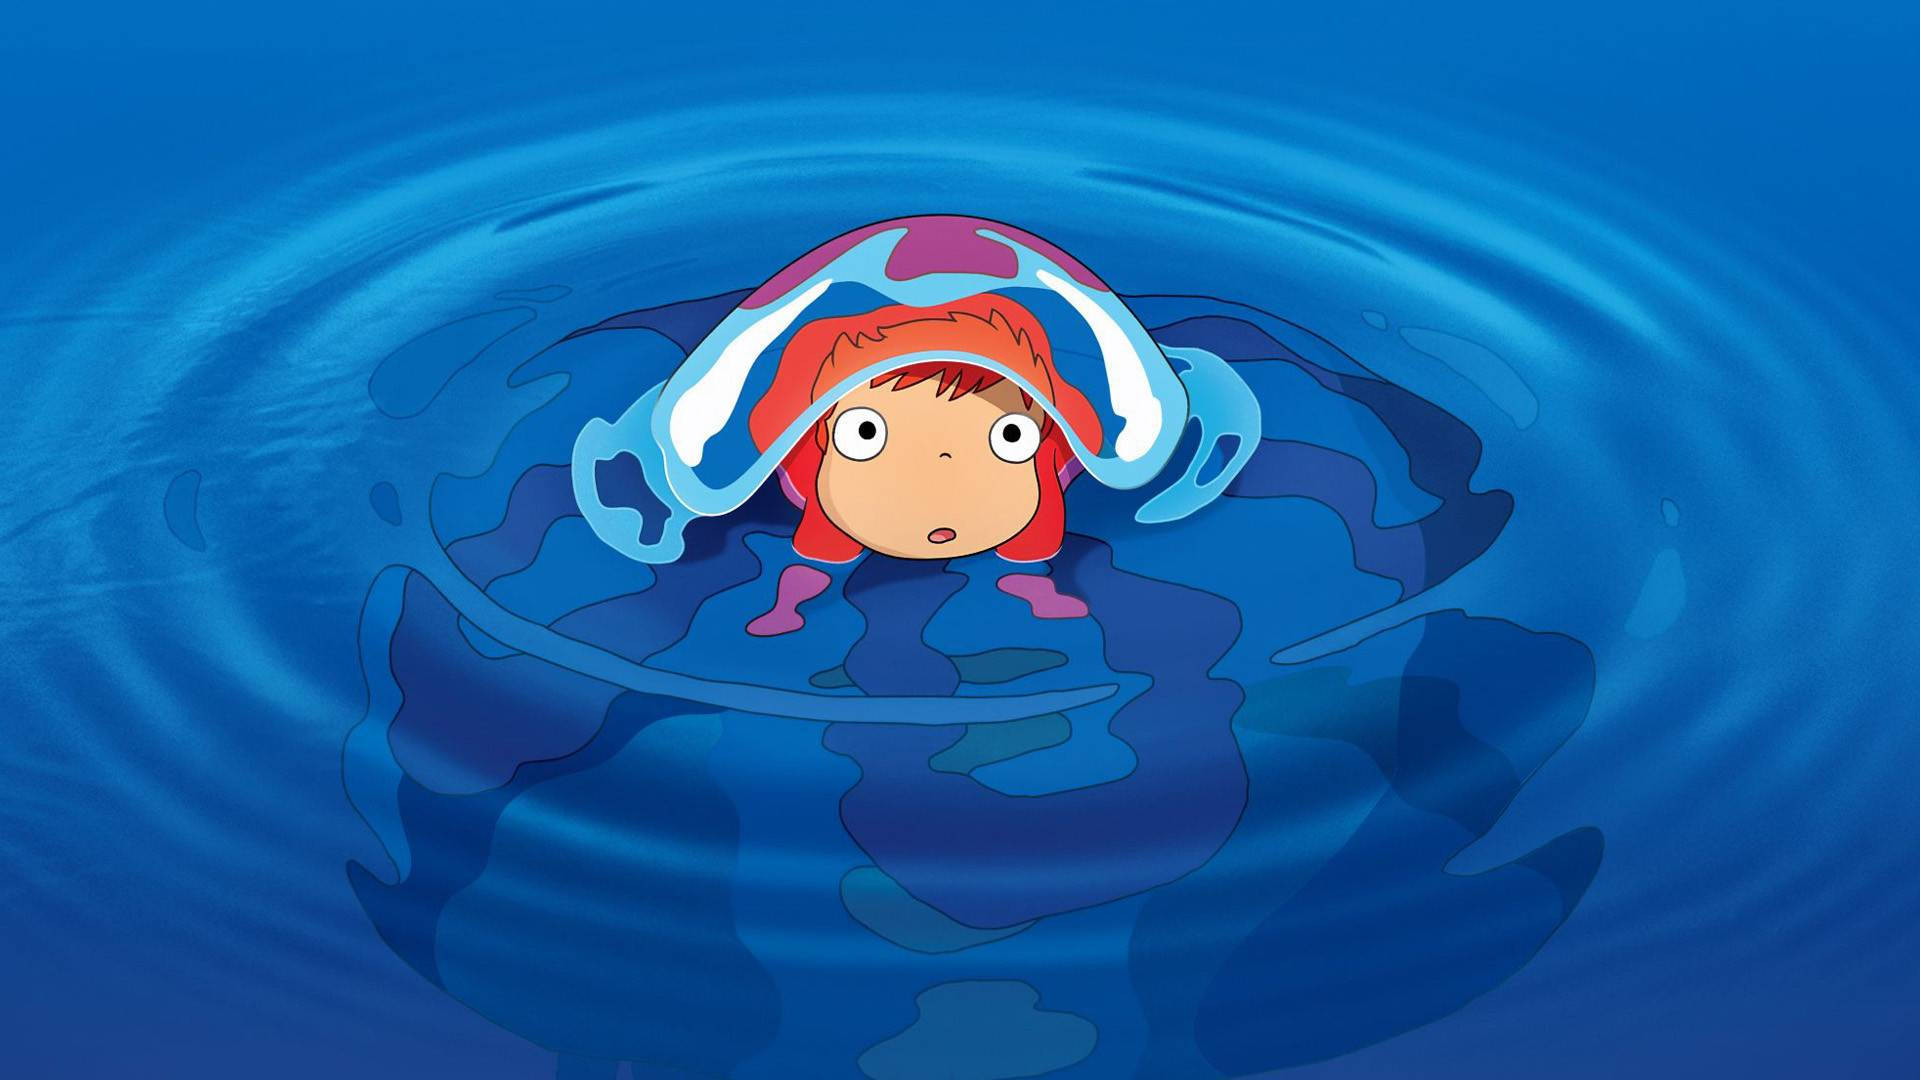 Download "Discover the beautiful world of Ponyo from Studio Ghibli!" Wallpaper | Wallpapers.com